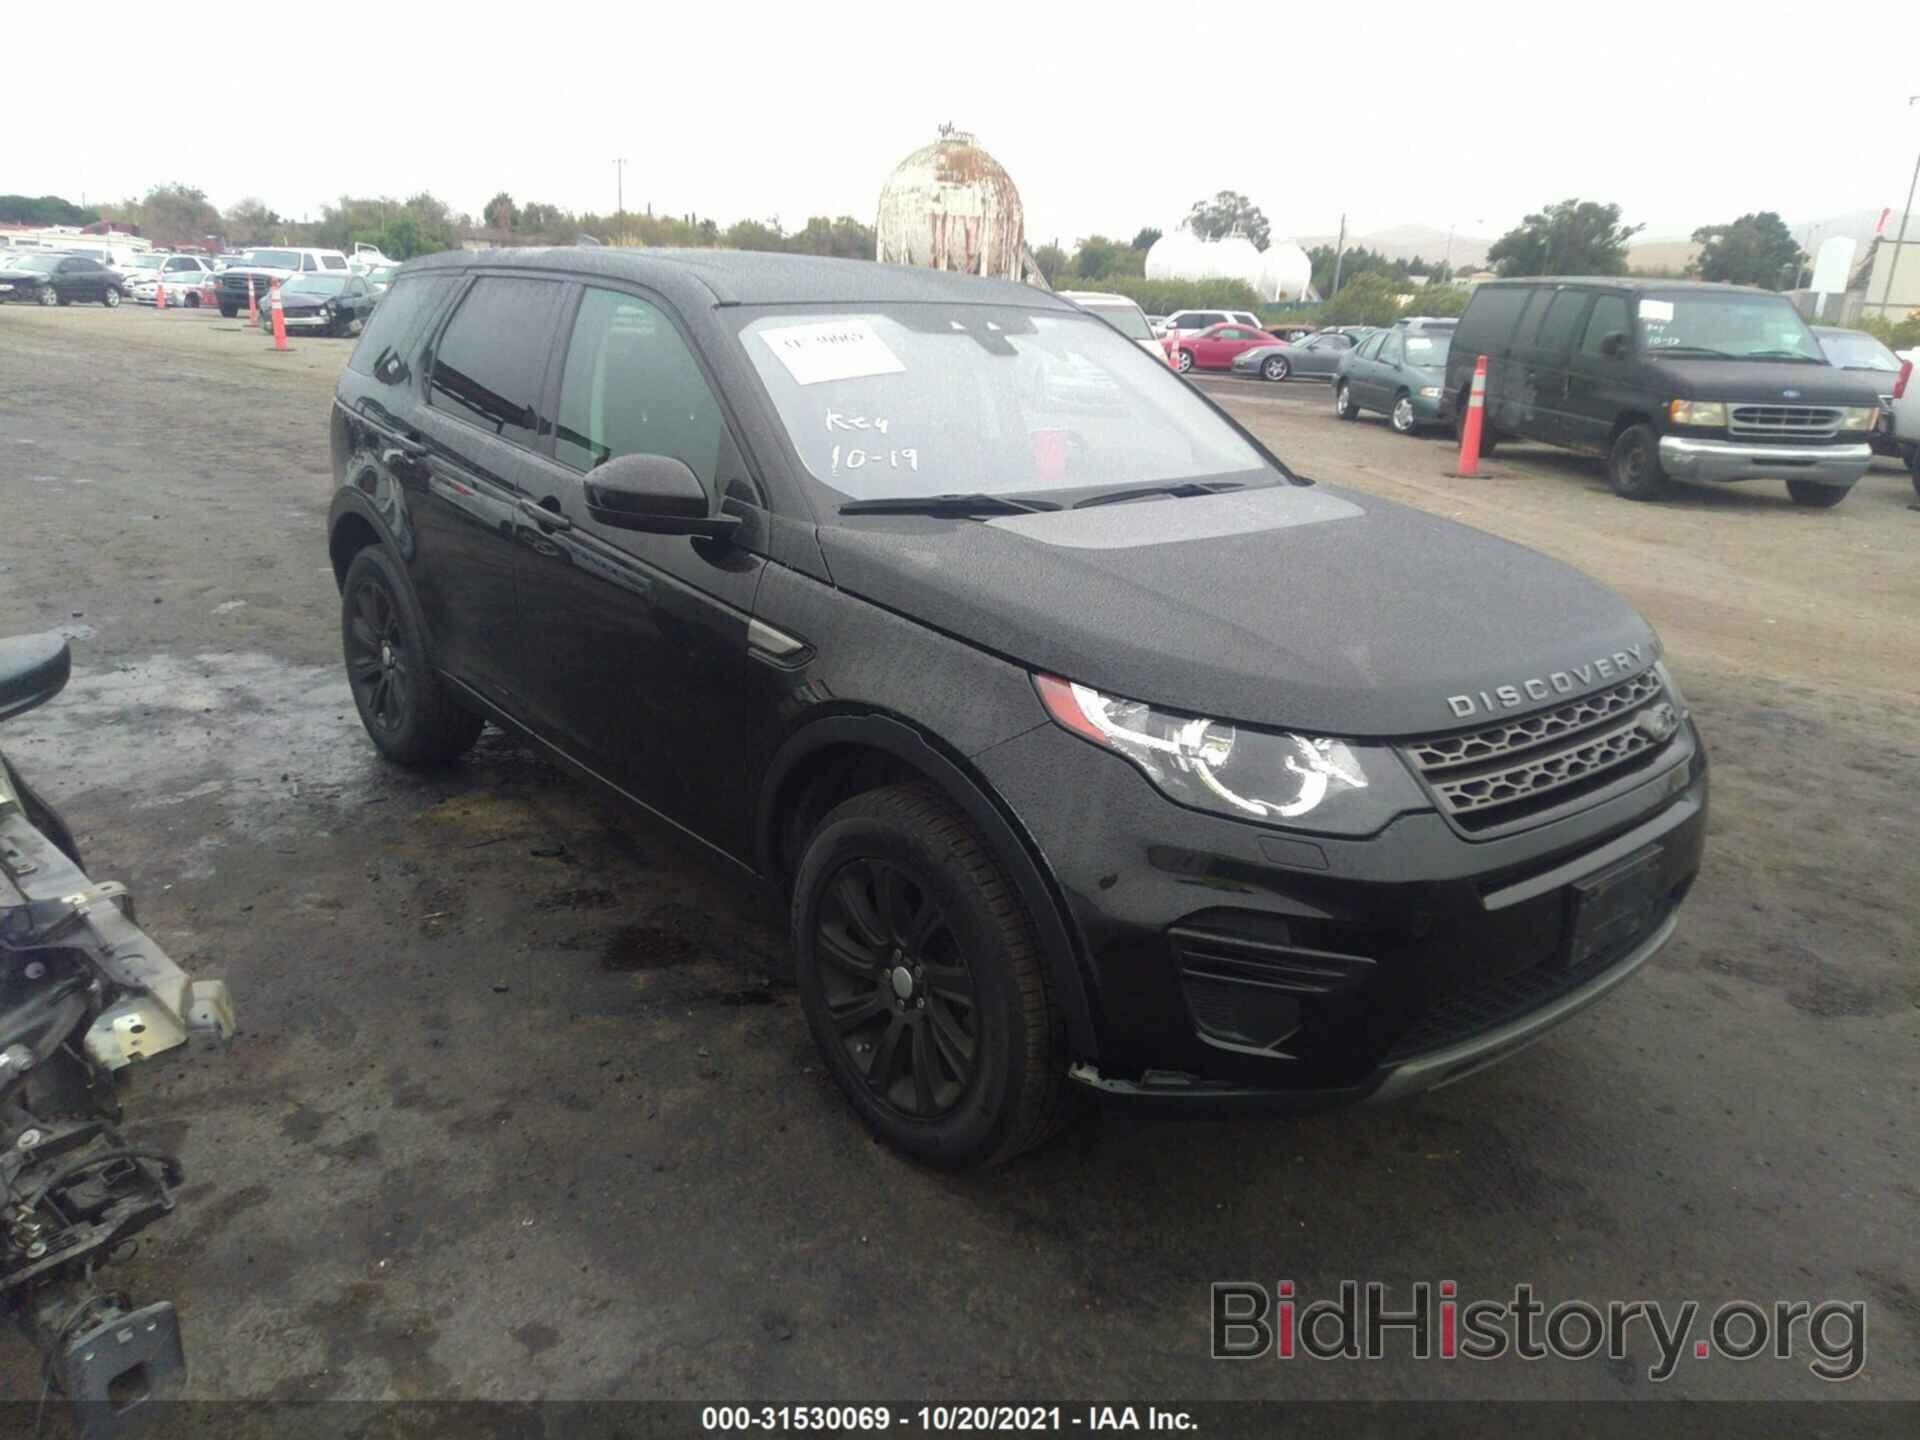 Фотография SALCP2BGXHH696774 - LAND ROVER DISCOVERY SPORT 2017